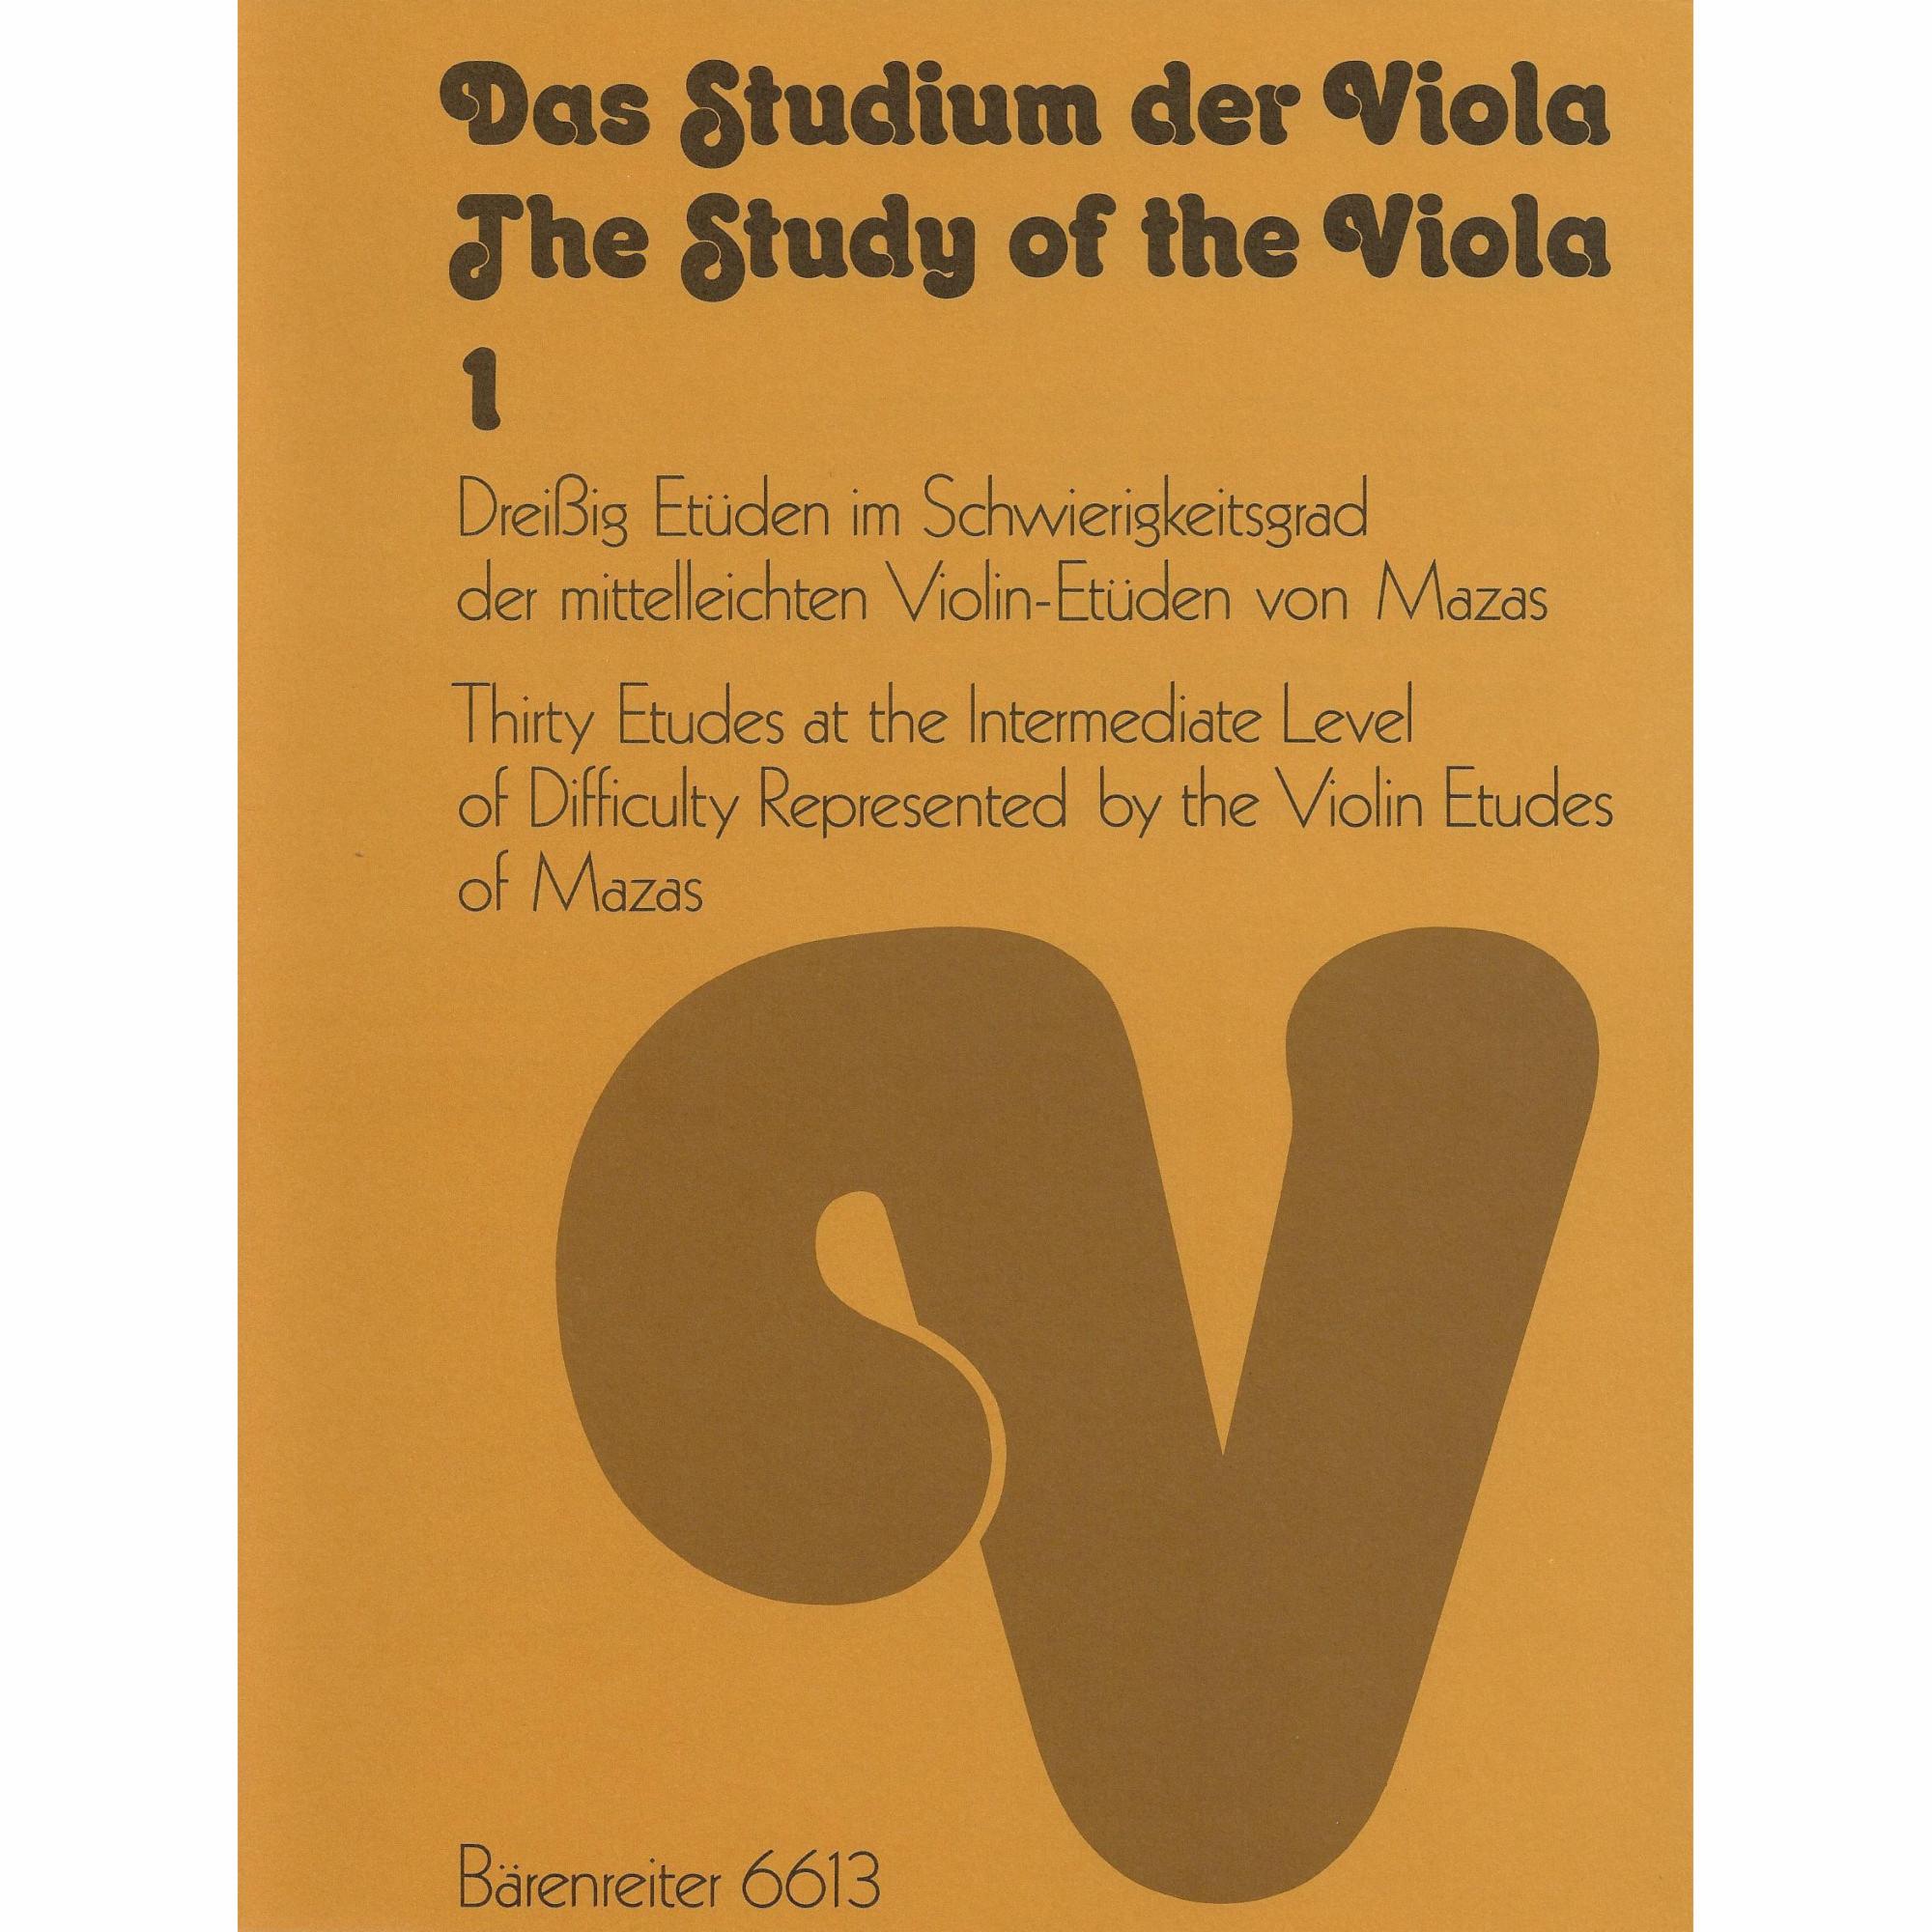 The Study of the Viola, Volumes 1-2